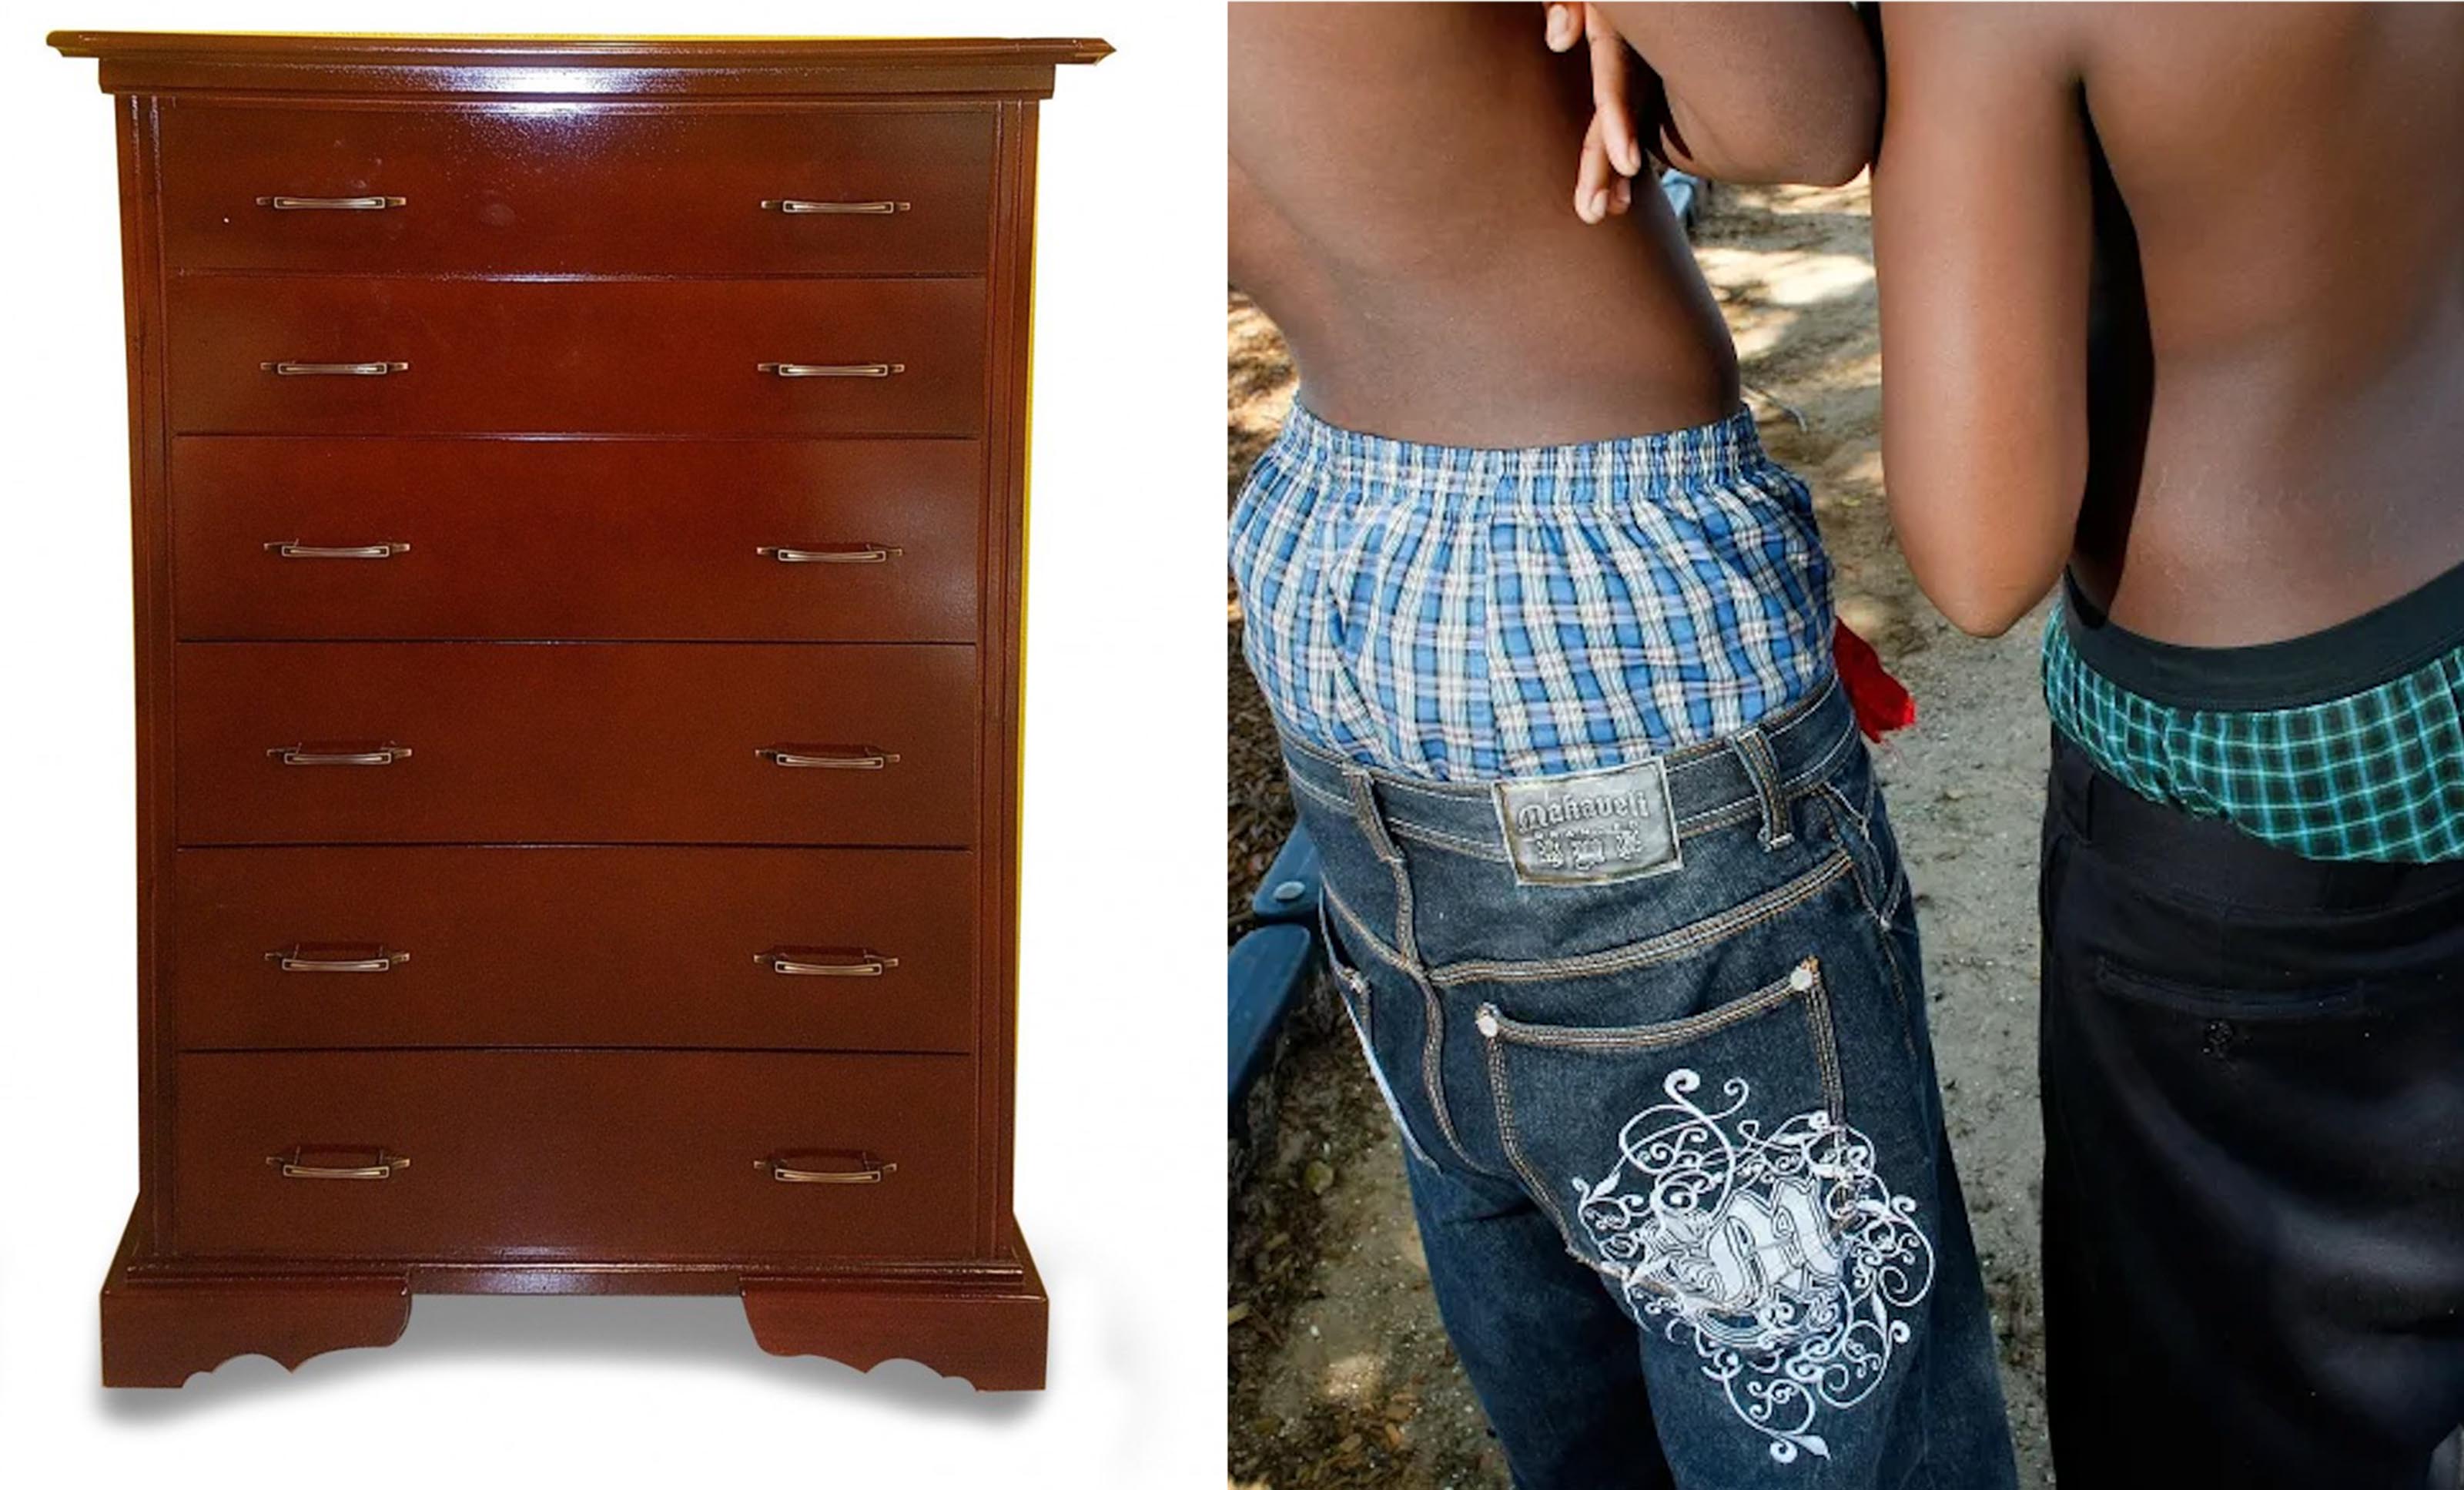 Wayne Chen on X: Drawers: Are #Jamaicans the only people who still refer  to underwear as drawers (or draws)? Originated in the 16th century and  this usage feels archaic as it seems